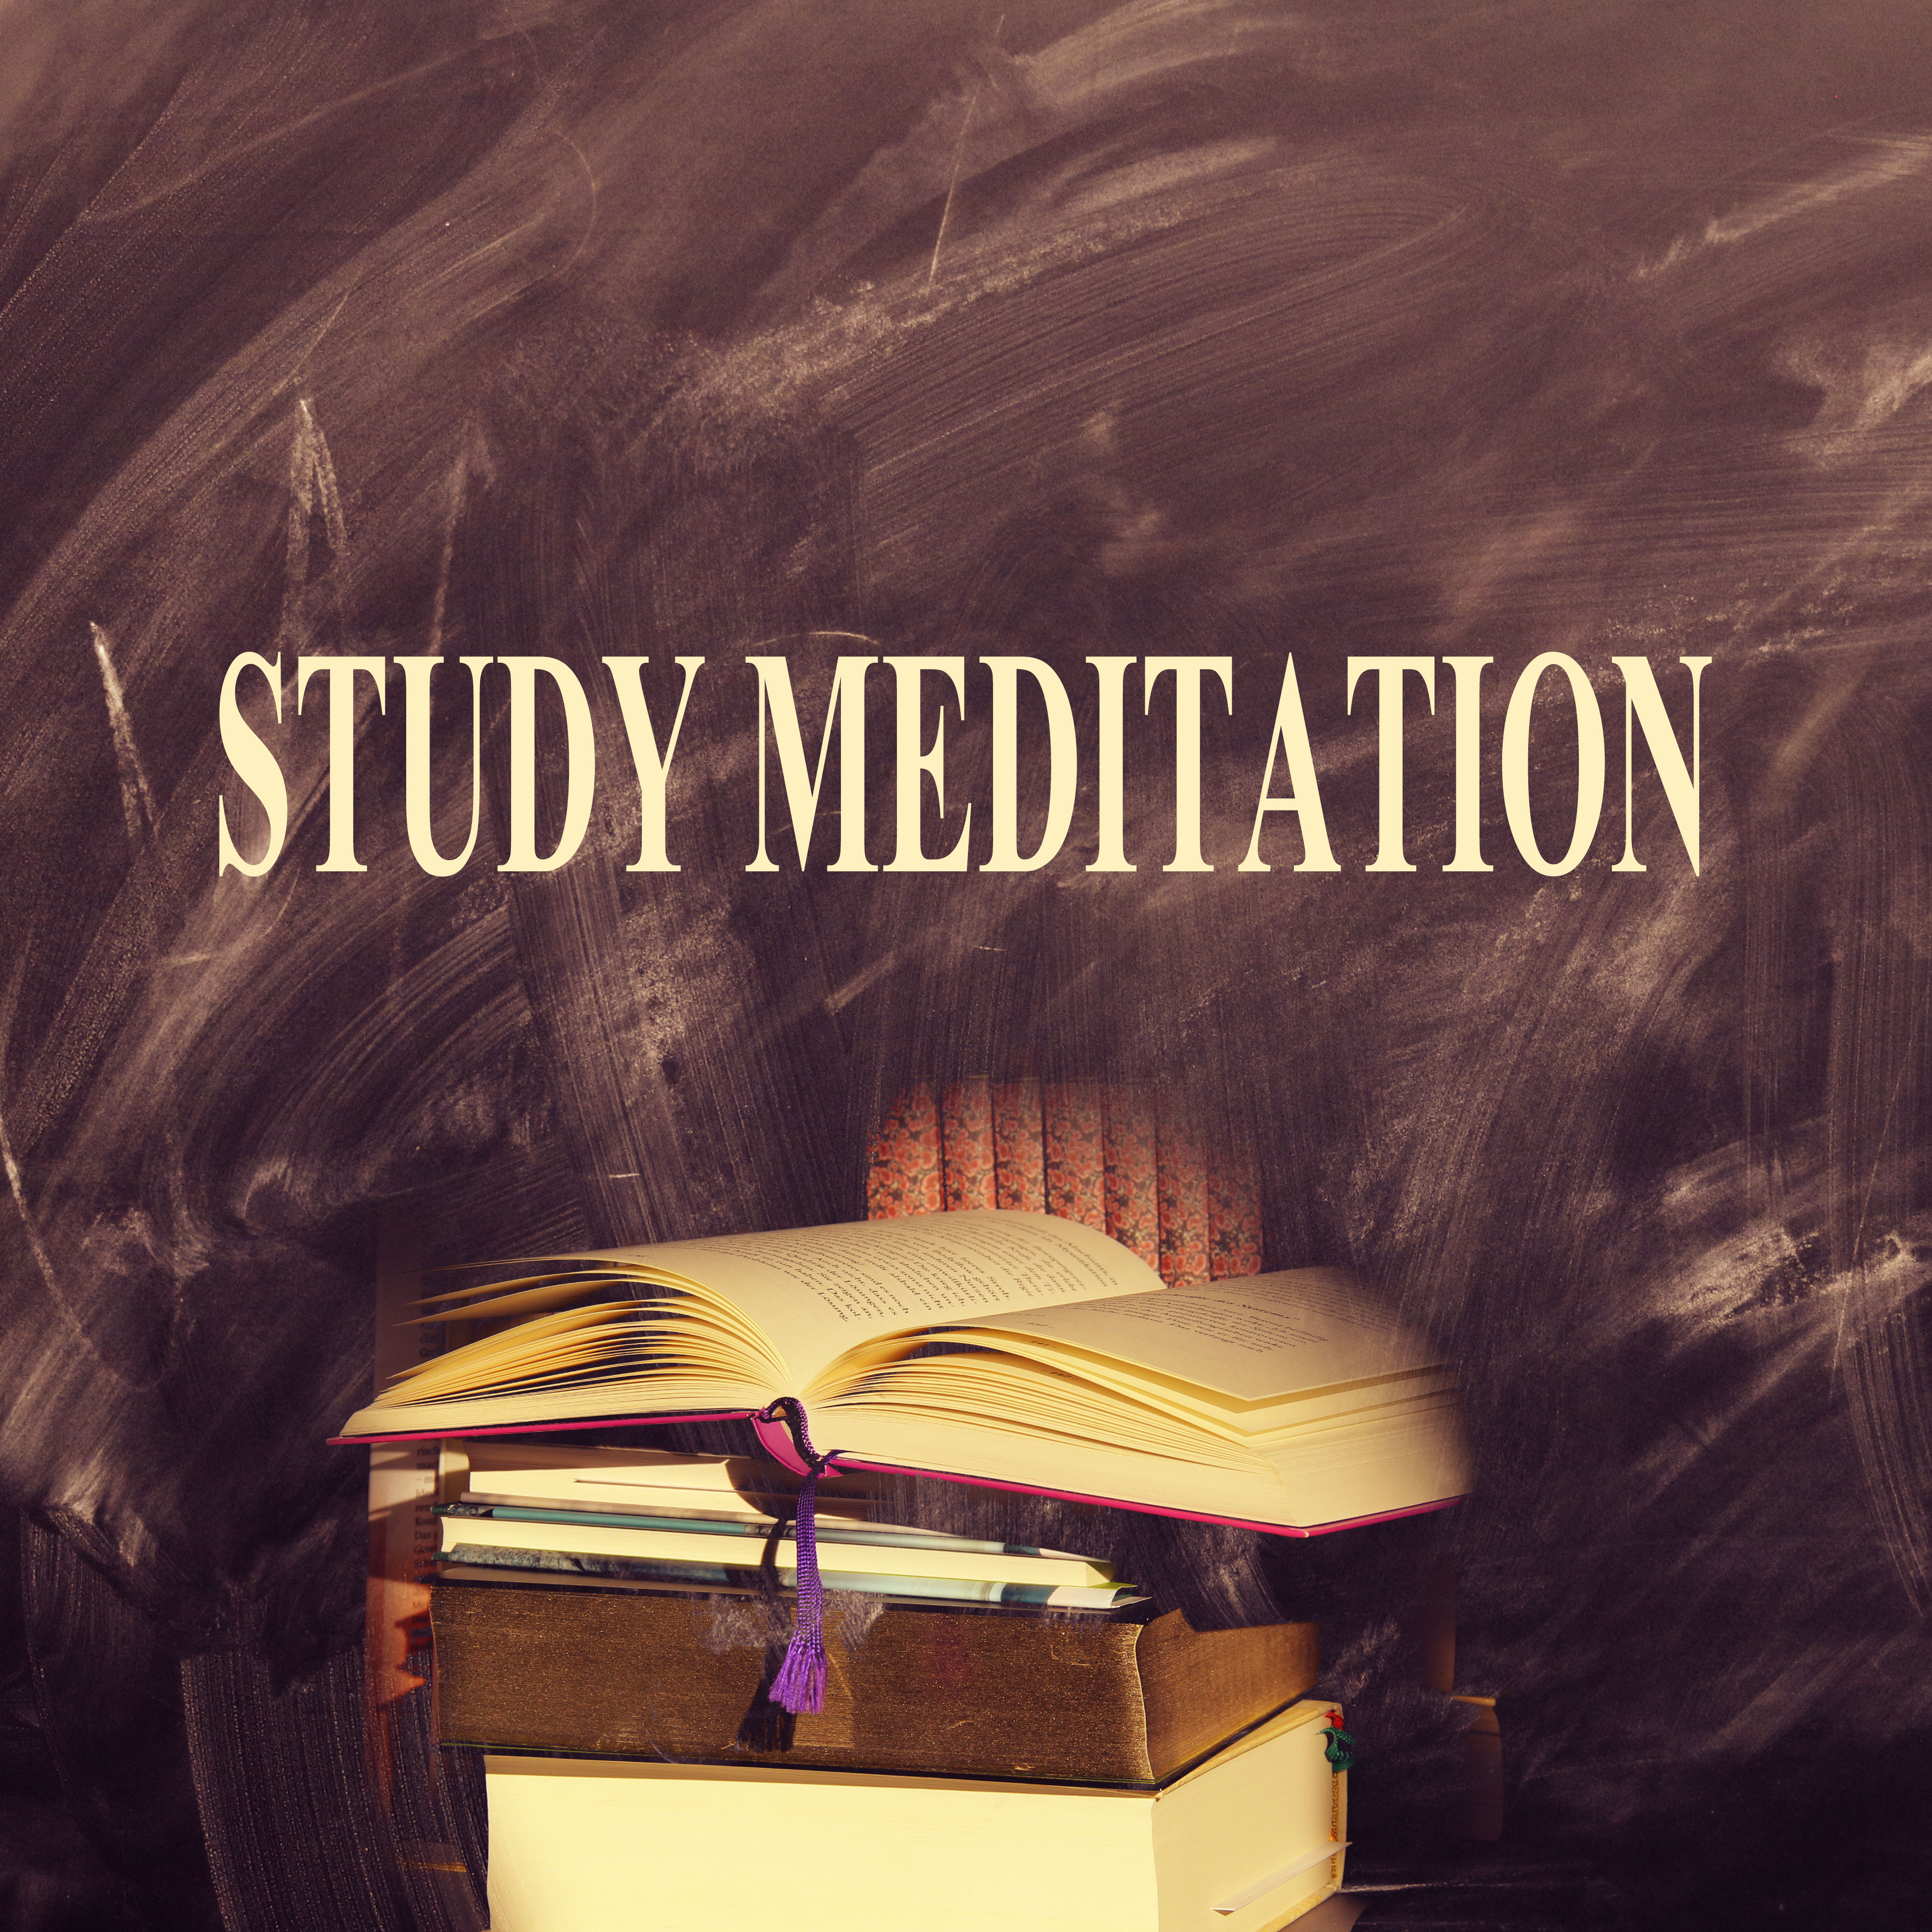 Study Meditation – Hard Working, Concentration & Relaxation Music Collection, Instrumental Learning